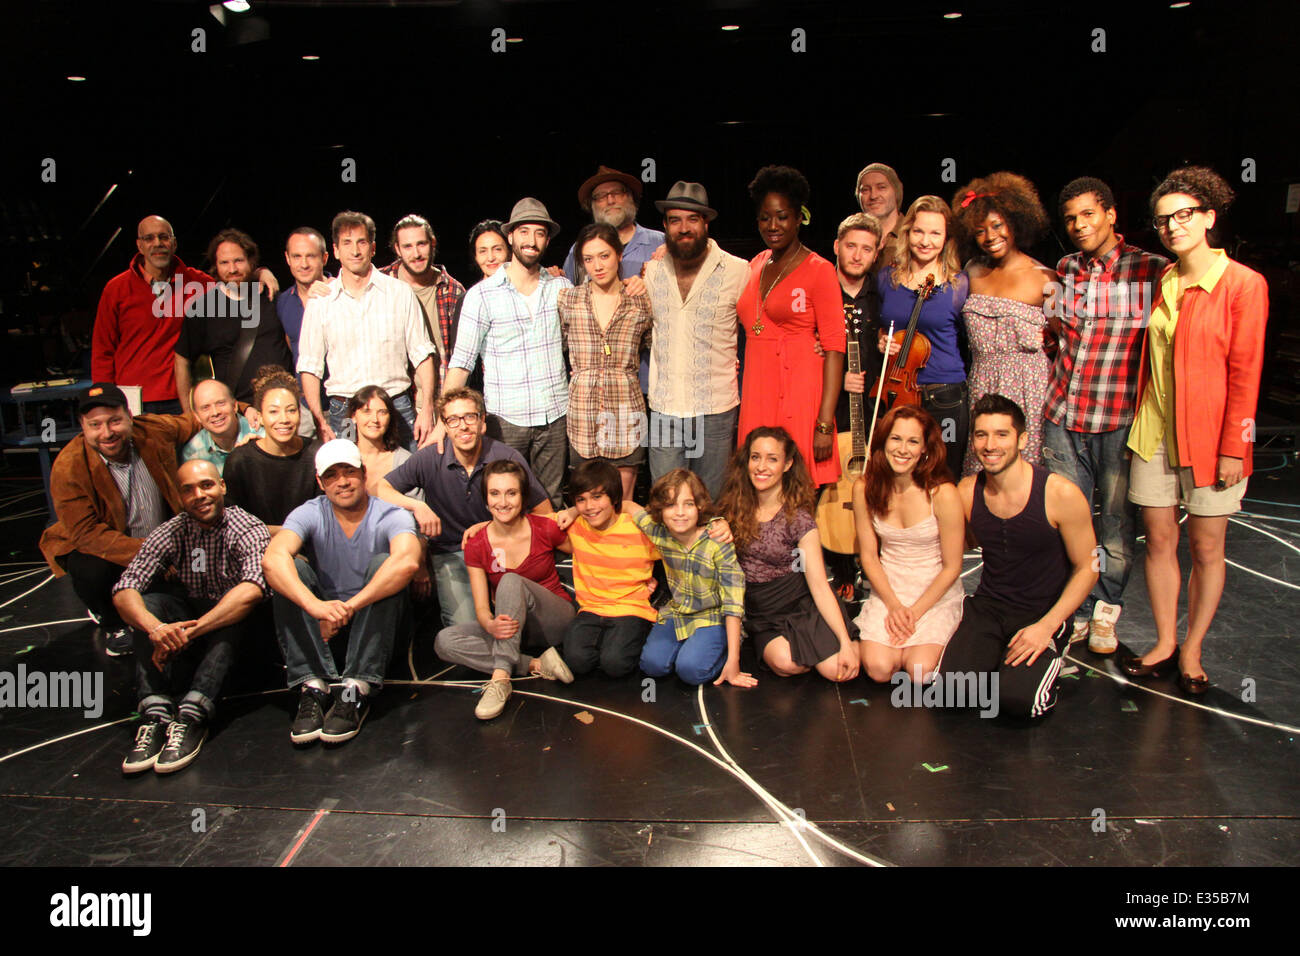 Meet and greet with the cast of the Broadway musical “Soul Doctor” held at Playwrights Horizons rehearsal space.  Featuring: David Schechter,Daniel S. Wise,Benoit-Swan Pouffer,Zarah Mahler,Eric Anderson,Amber Iman Where: New York, NY, United States When: 27 Jun 2013 Stock Photo